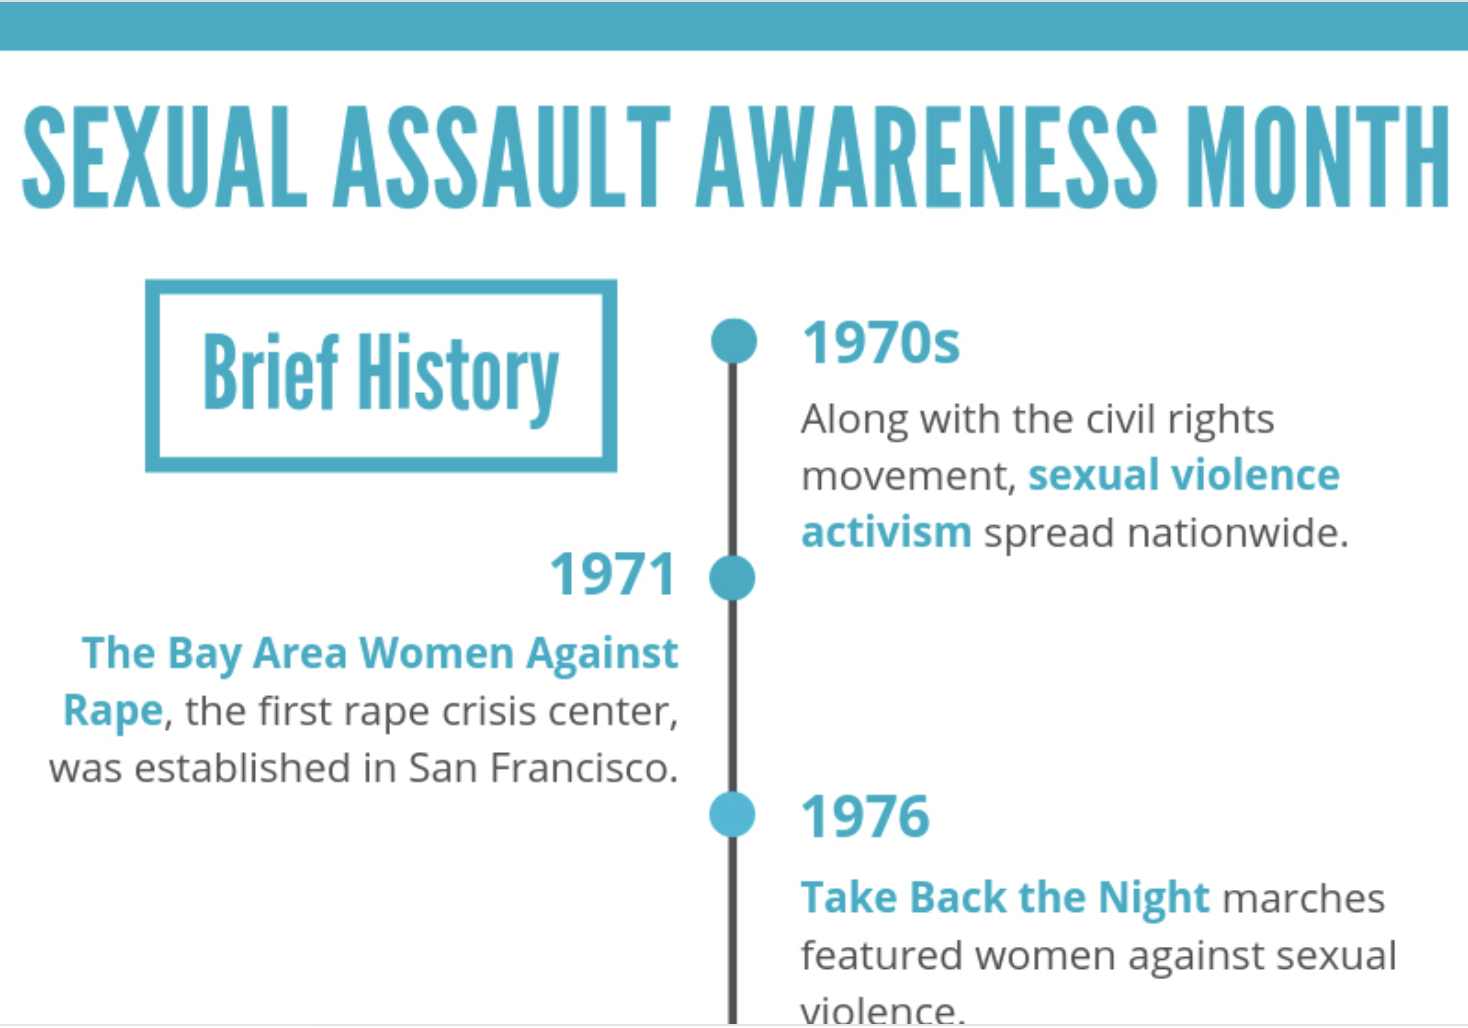 GRAPHIC: Infographic on Sexual Assault Awareness Month. Graphic by The Signal reporter Nhu Tran.